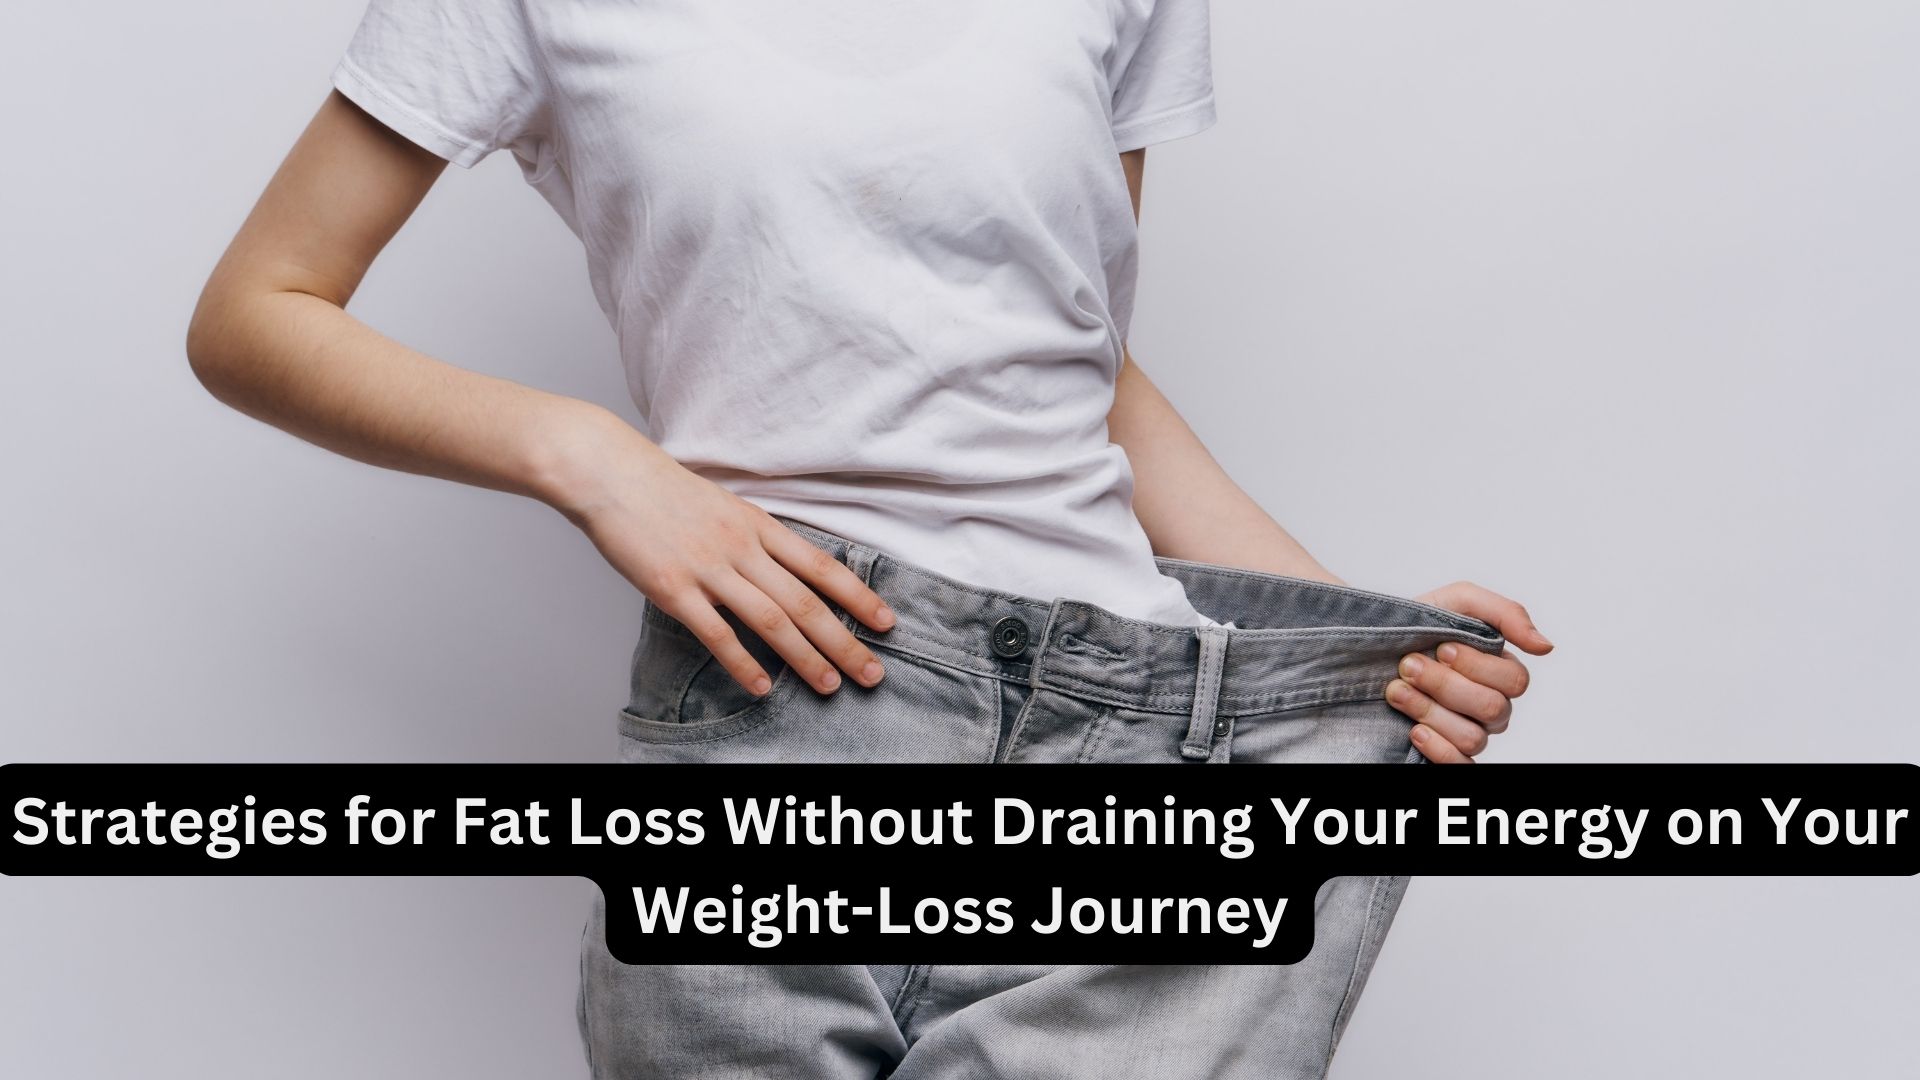 Strategies for Fat Loss Without Draining Your Energy on Your Weight-Loss Journey